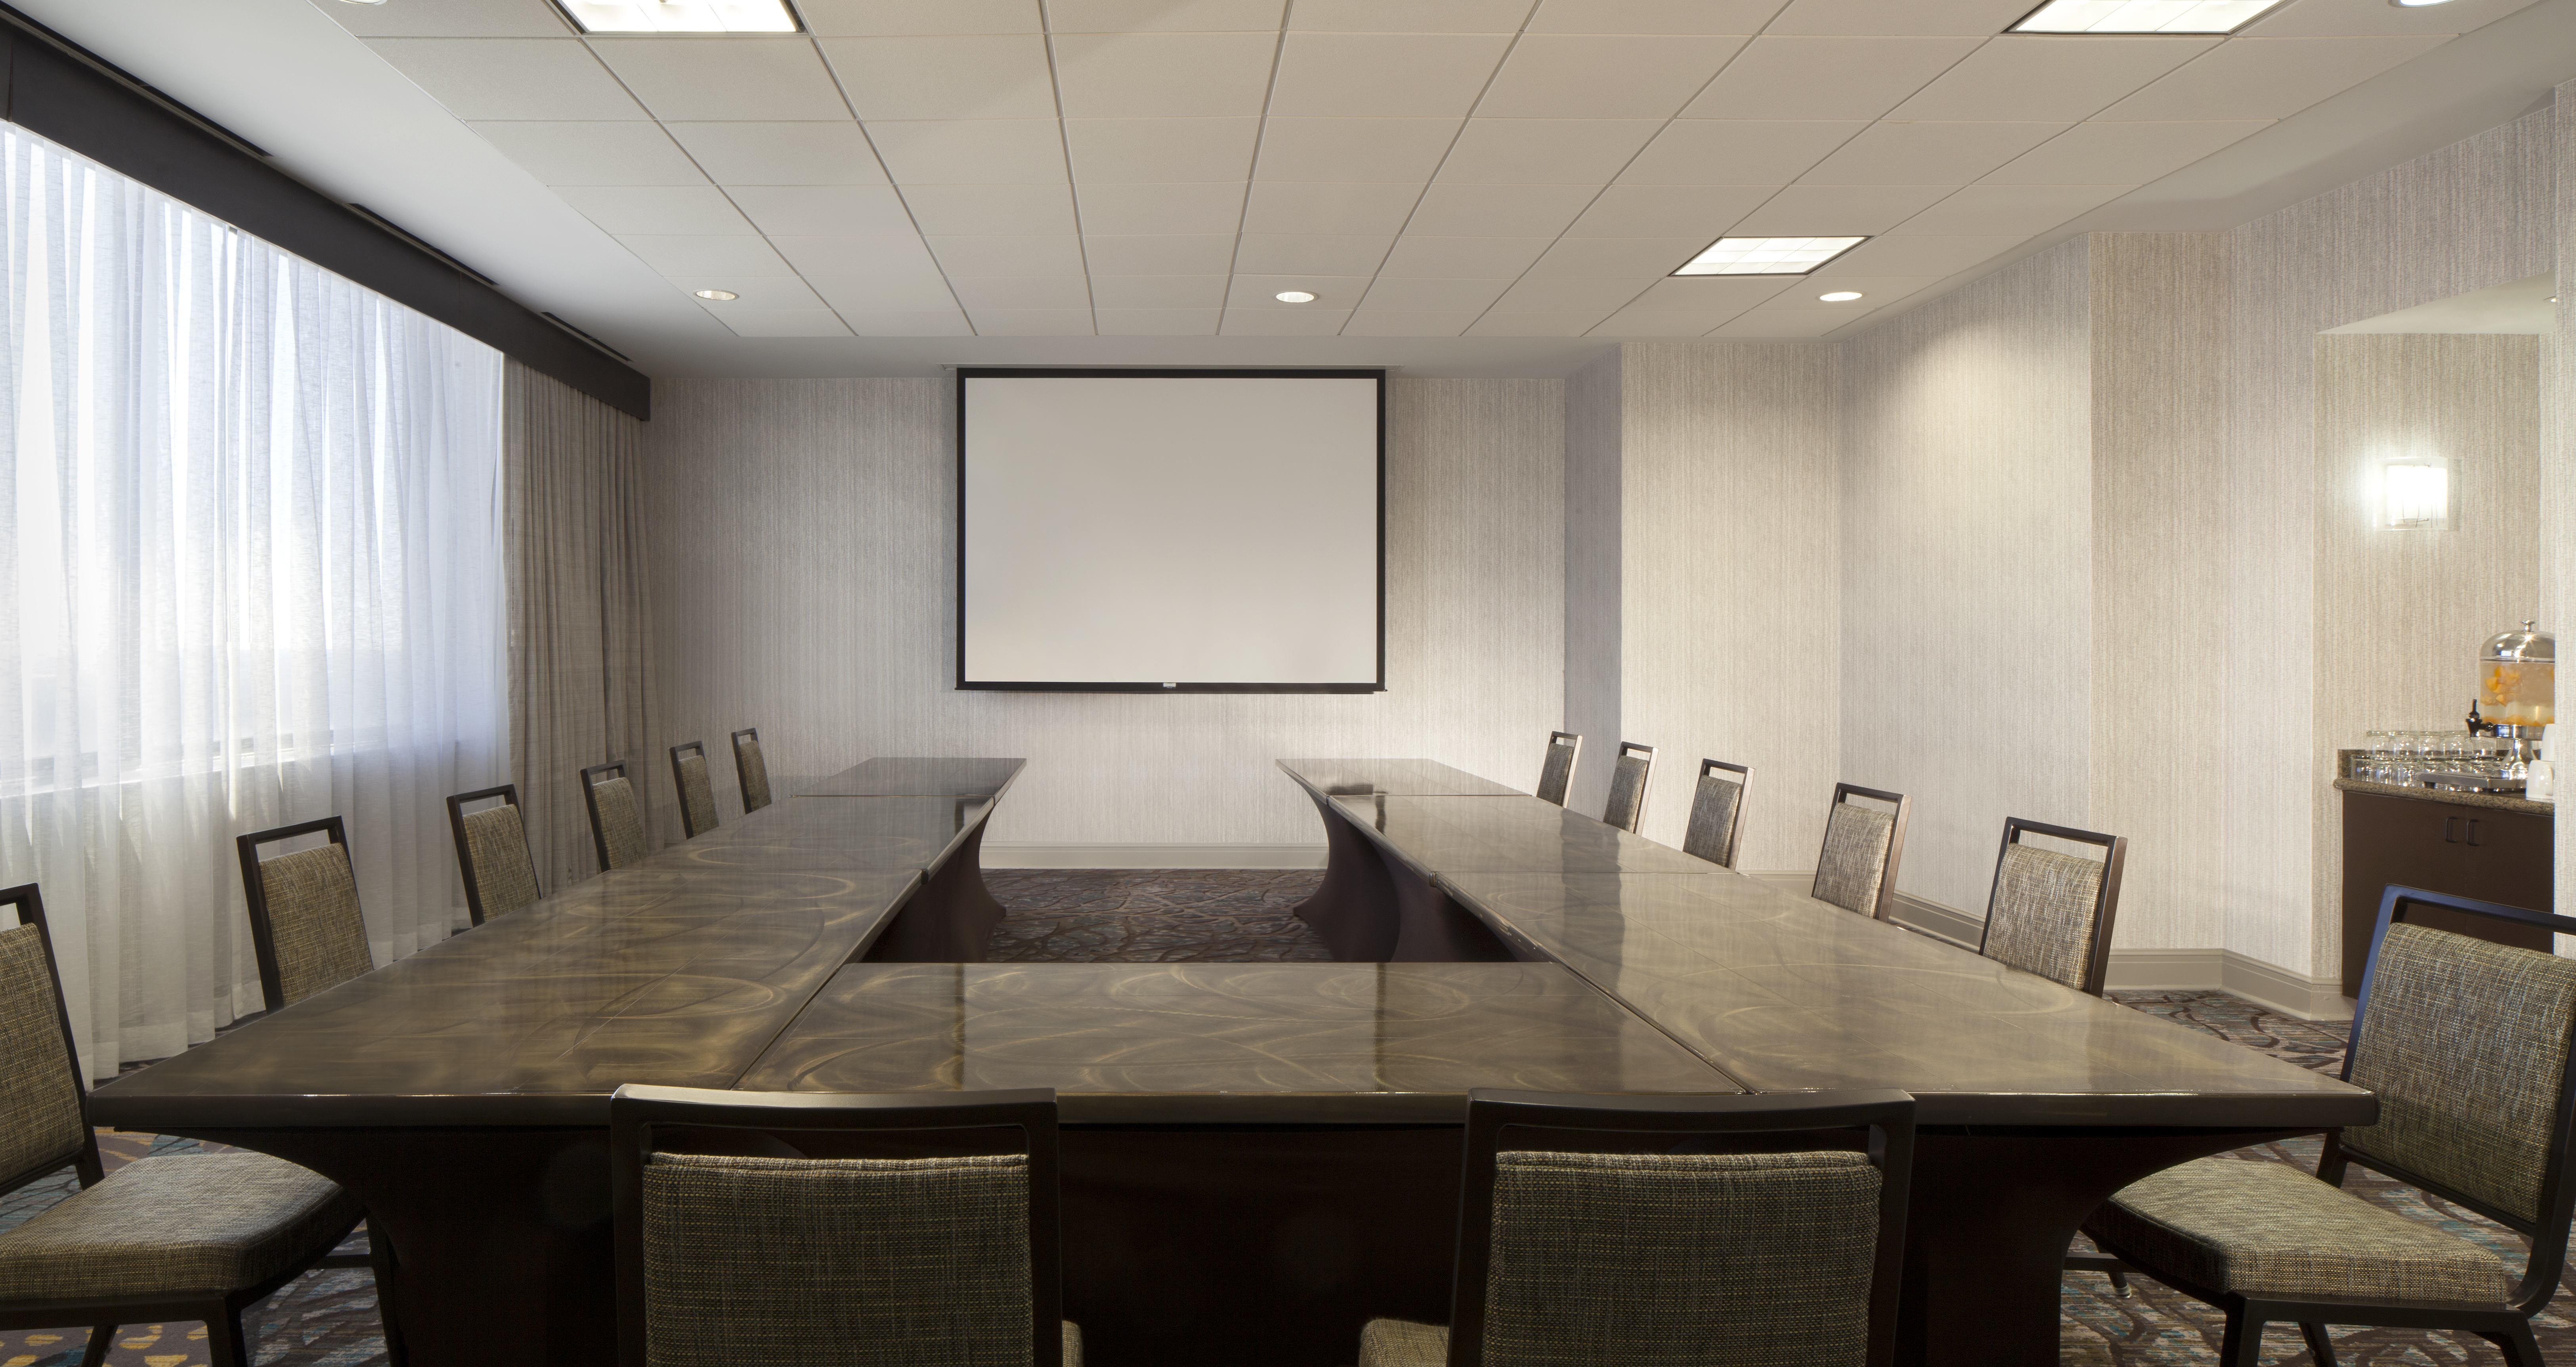 Meeting Room U-Shape Table Layout with Projector Screen